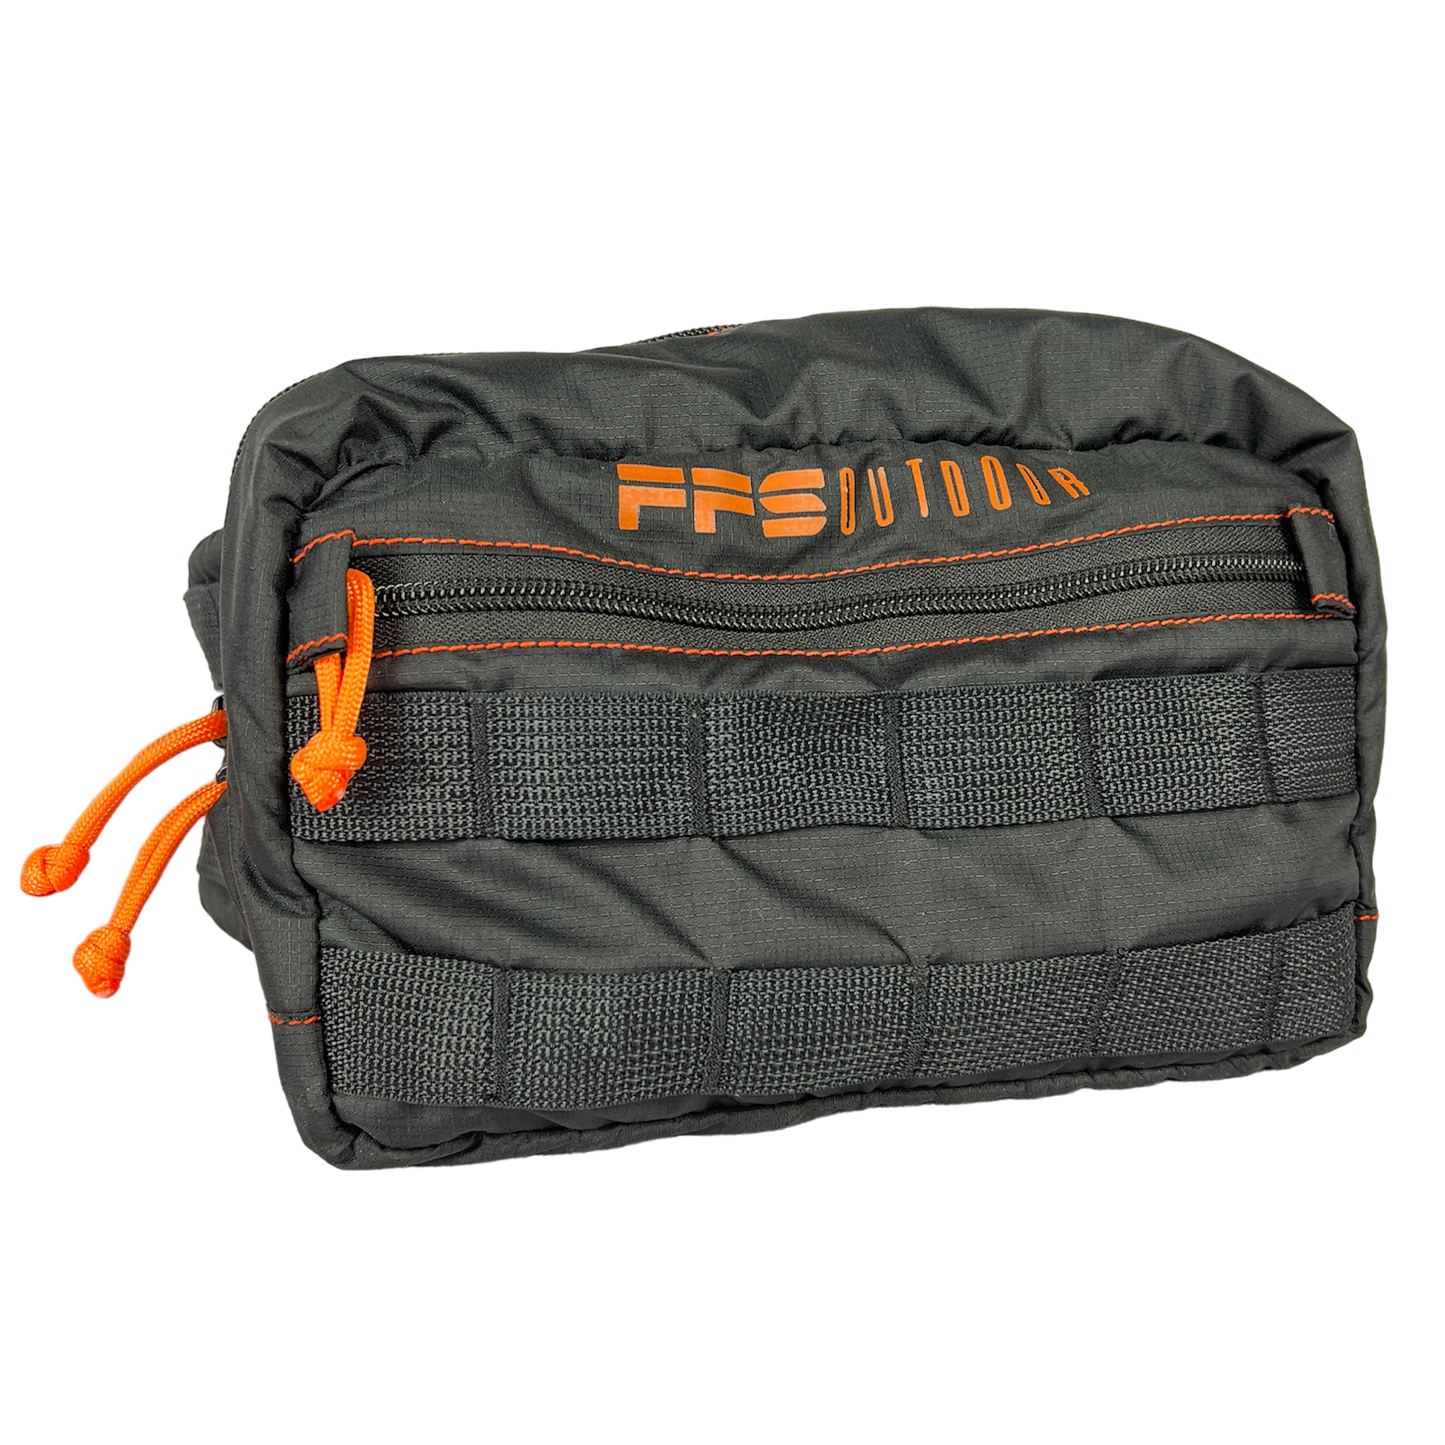 Firearm concealment gear bag and fishing chest pack